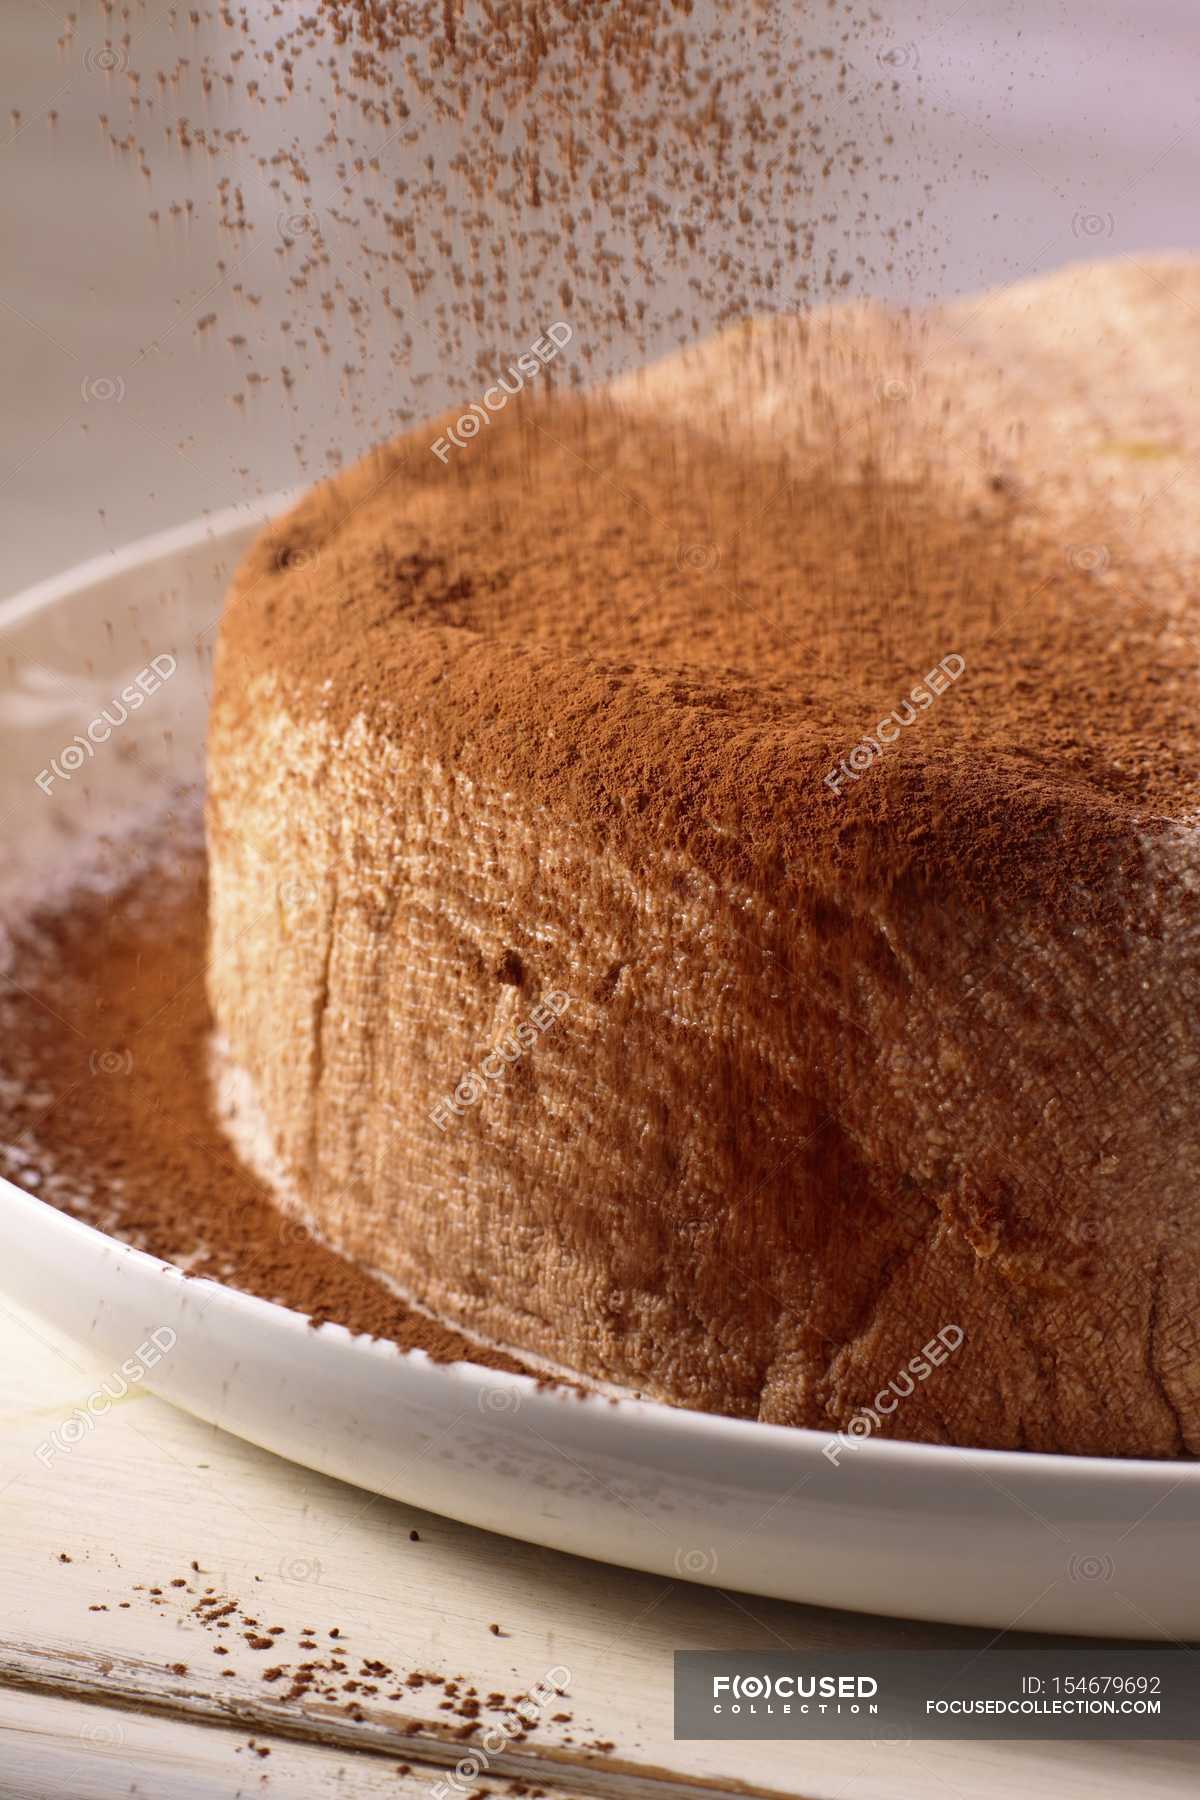 When baking a chocolate cake, grease your cake pans and dust them with cocoa  powder instead of flour. Prevents sticking, adds a chocolately layer, and  prevents any white floury patches. : r/foodhacks